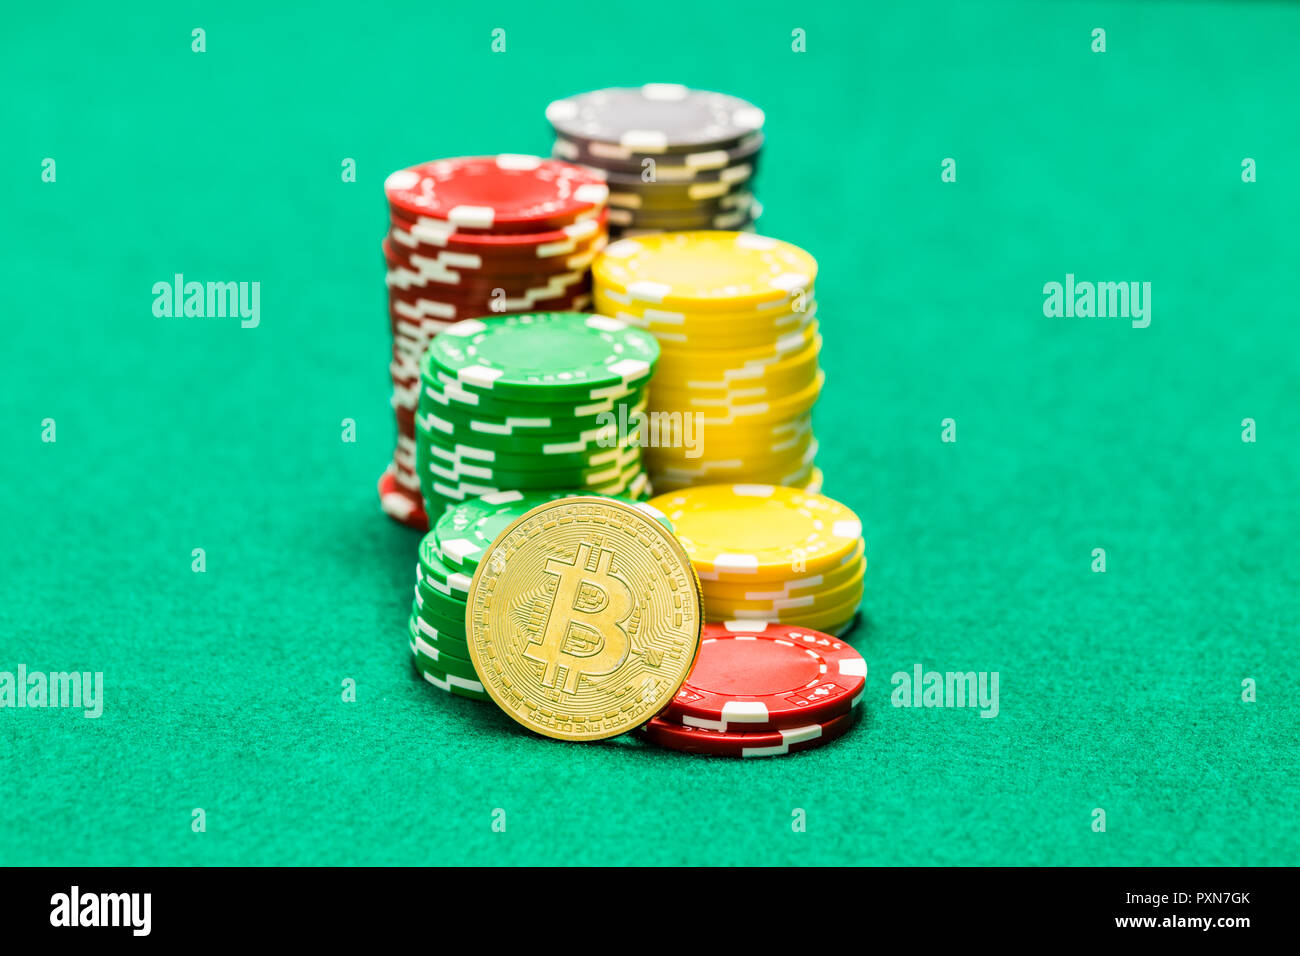 How To Make Your Product Stand Out With Best Bitcoin Casinos in 2021